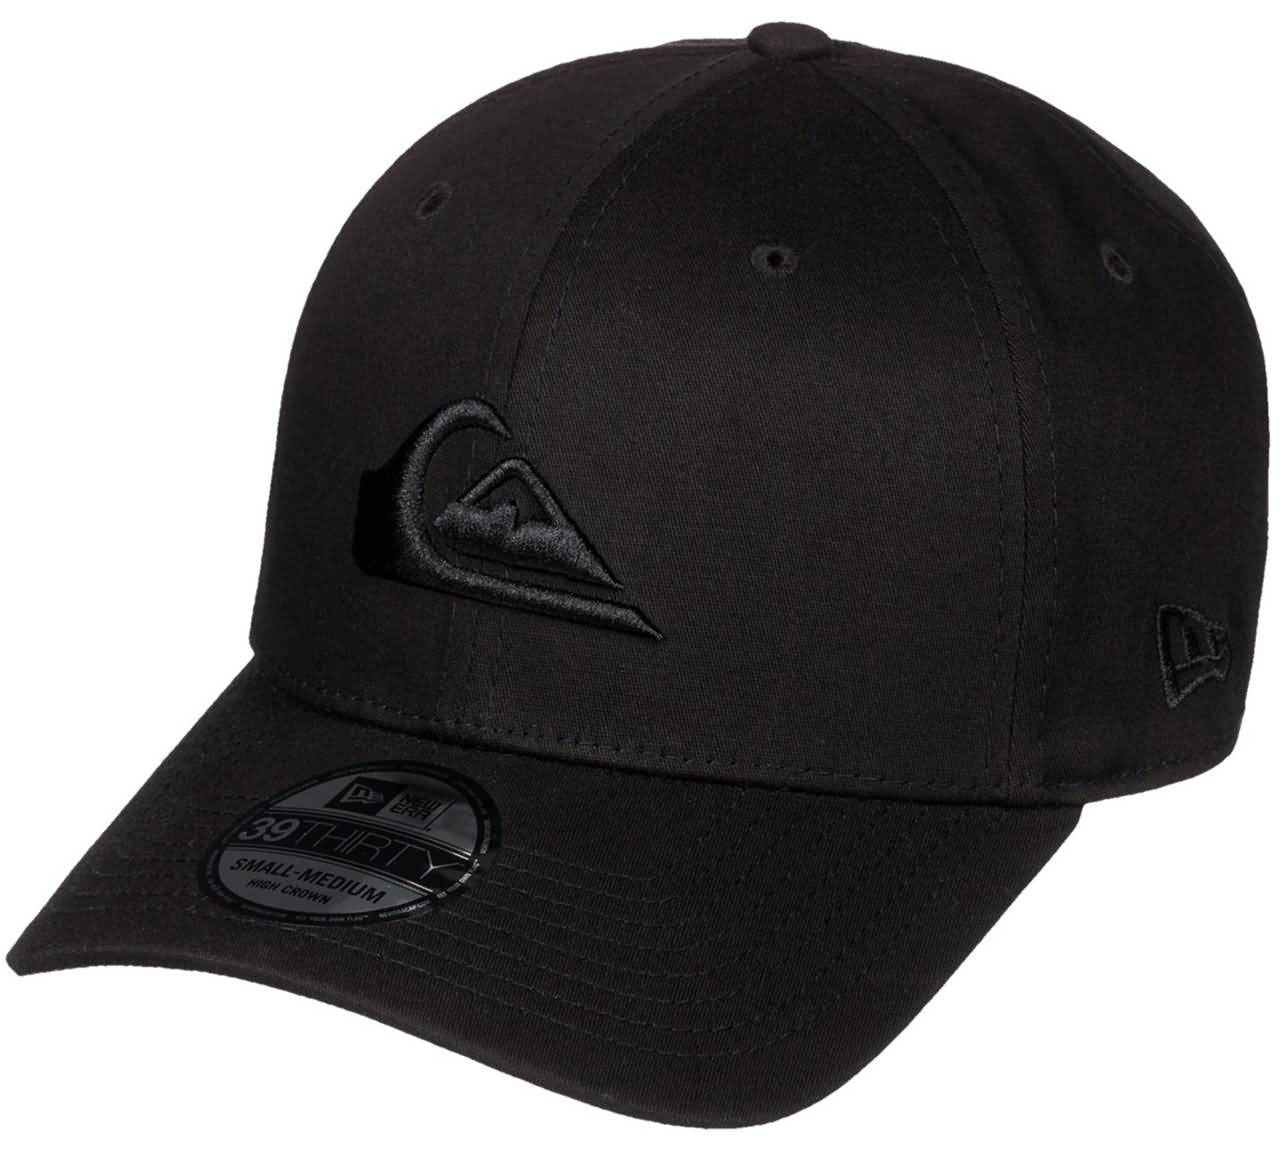 Quiksilver Surf Fall 2017 Mens - Skate/Surf/Sports Collection Headwear – Accessories Hats OriginBoardshop